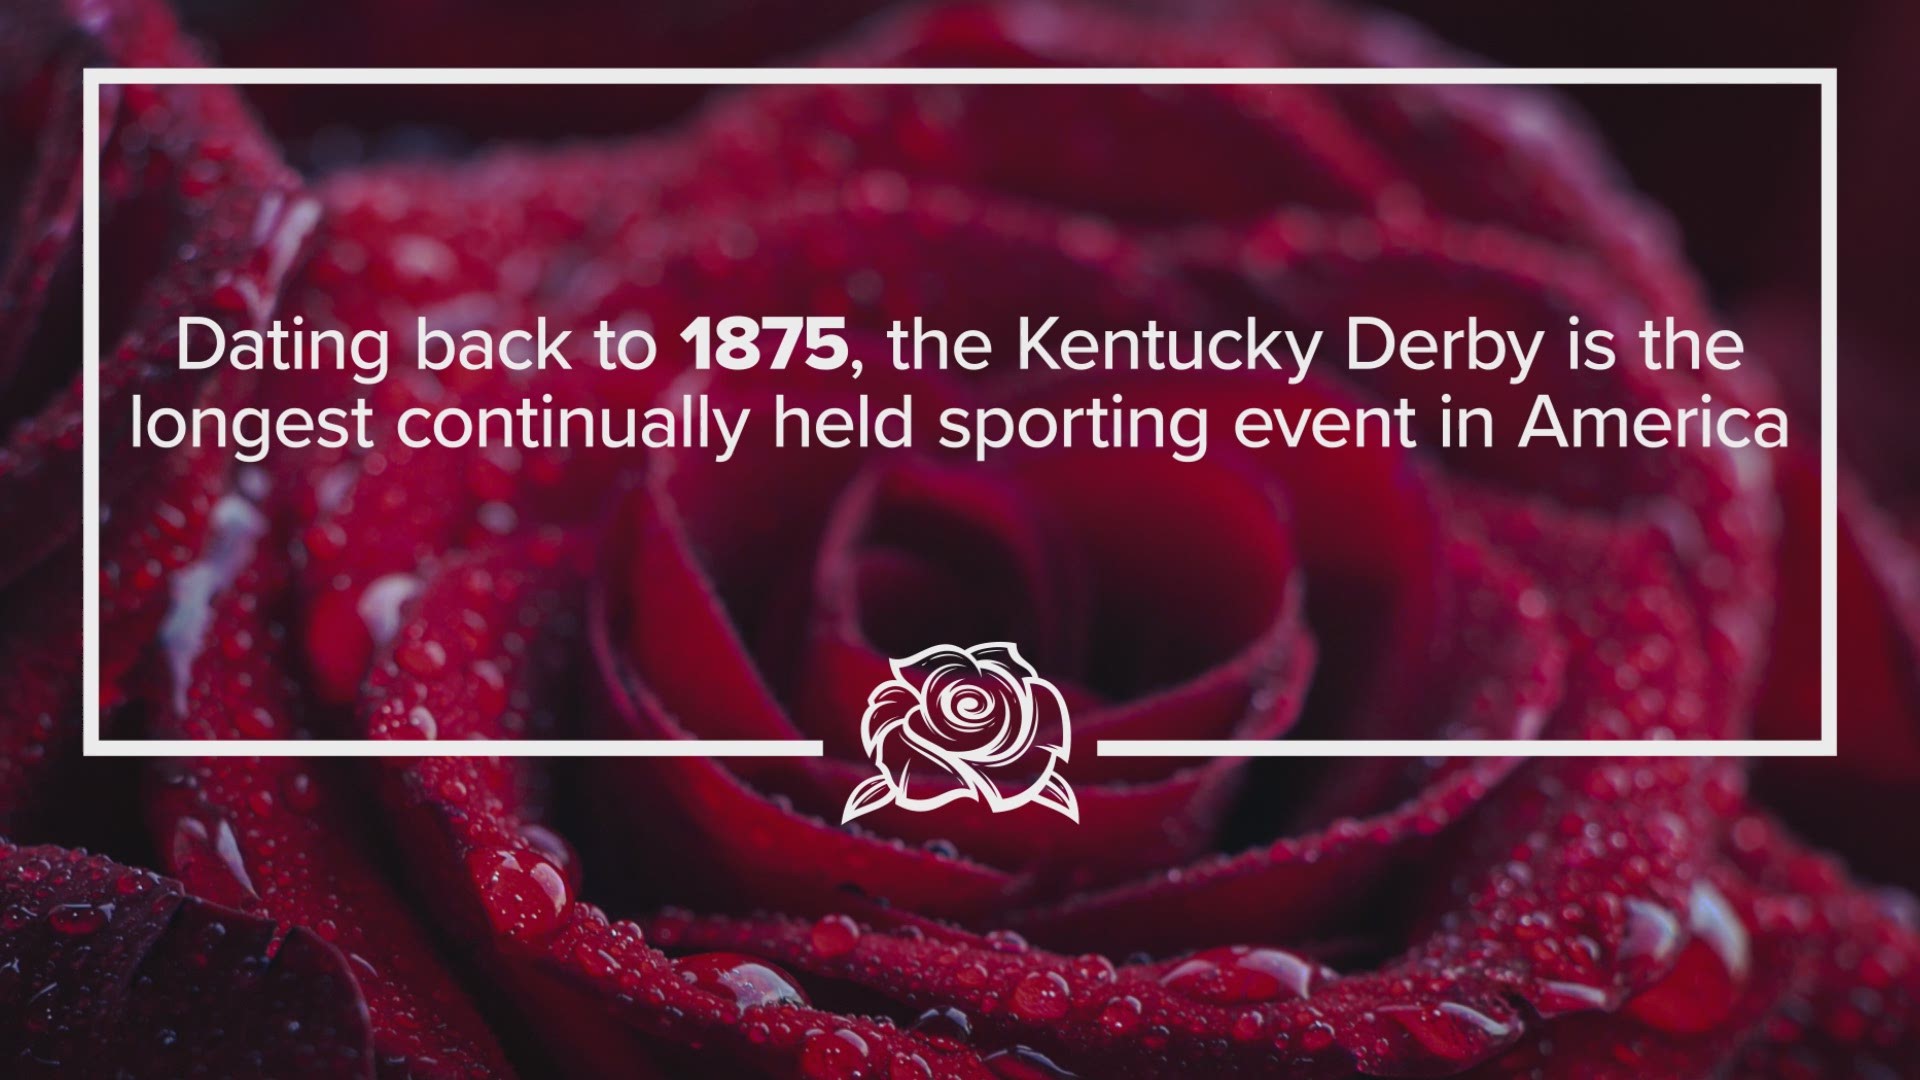 Here are 10 fun facts to know before the running of the 145th Kentucky Derby.